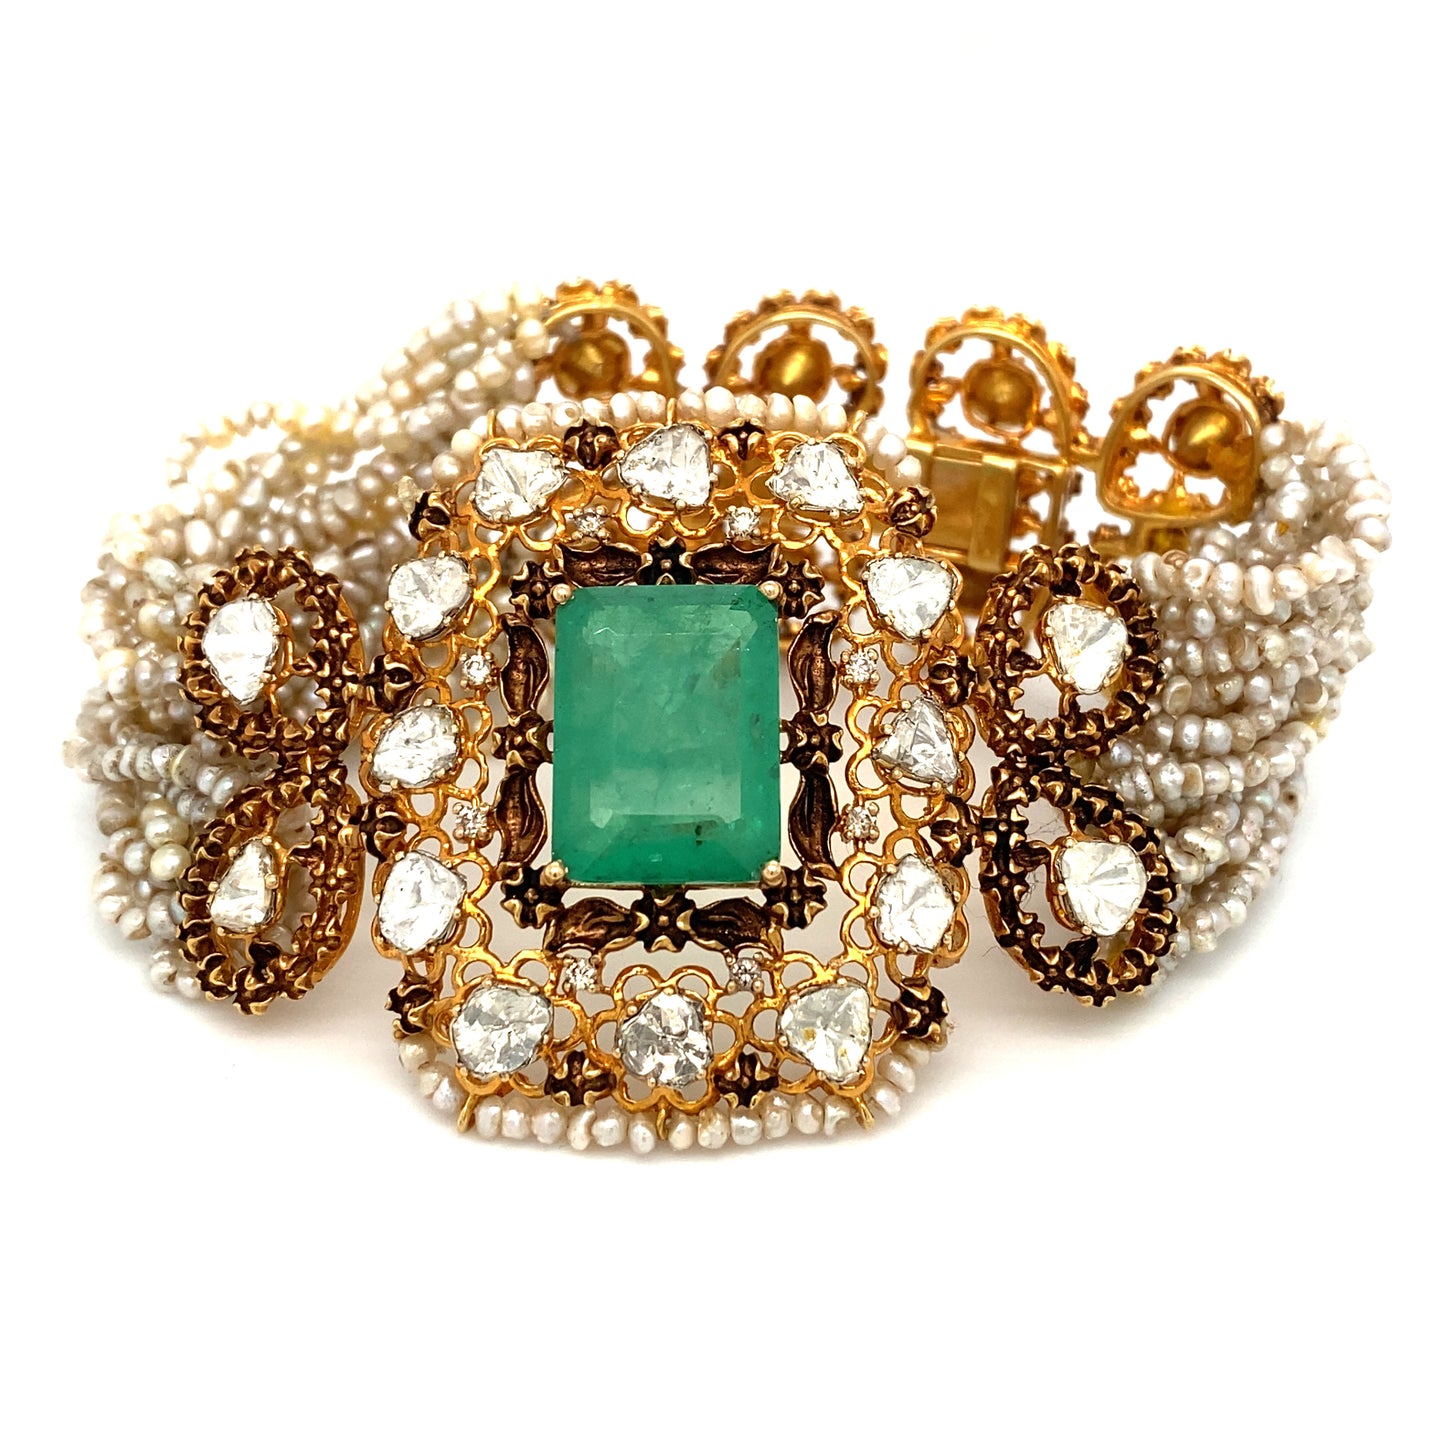 Circa 1950s Victorian Revival Seed Pearl and Emerald Bracelet in 14K Gold